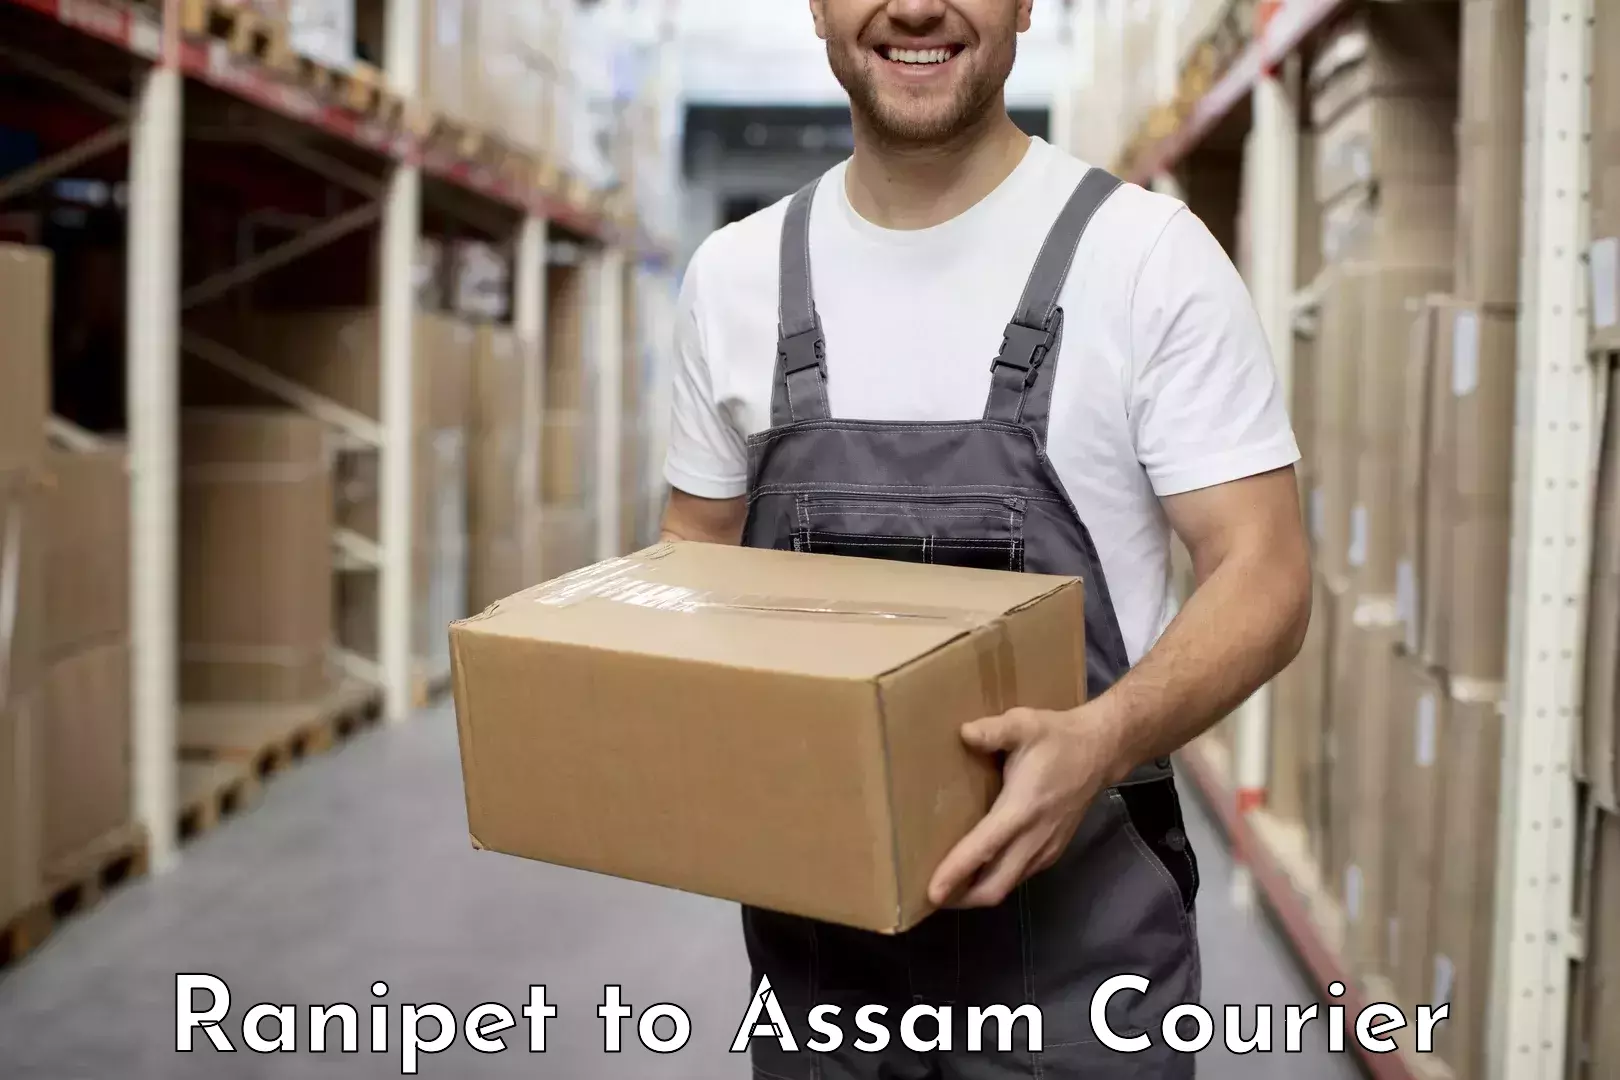 Advanced delivery network Ranipet to Lala Assam